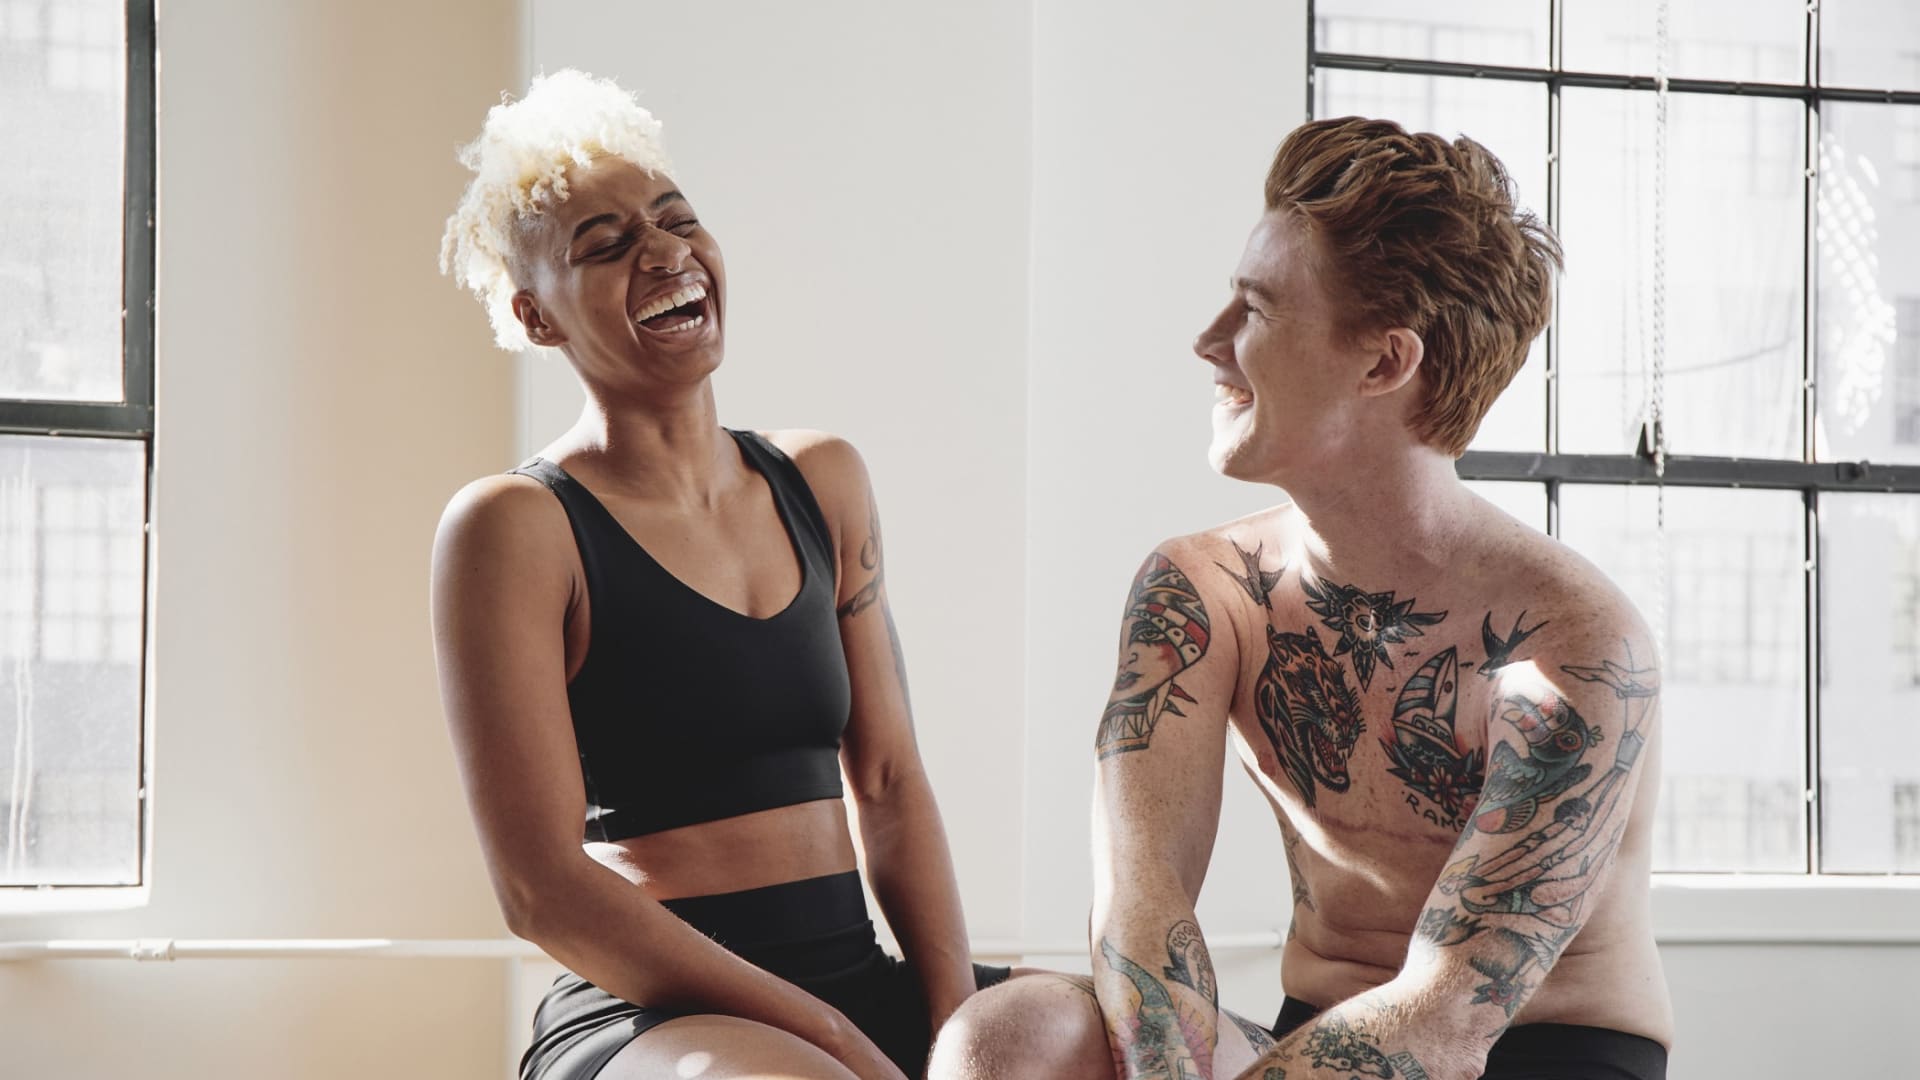 Urbody makes gender-affirming undergarments for trans, nonbinary and gender nonconforming individuals.